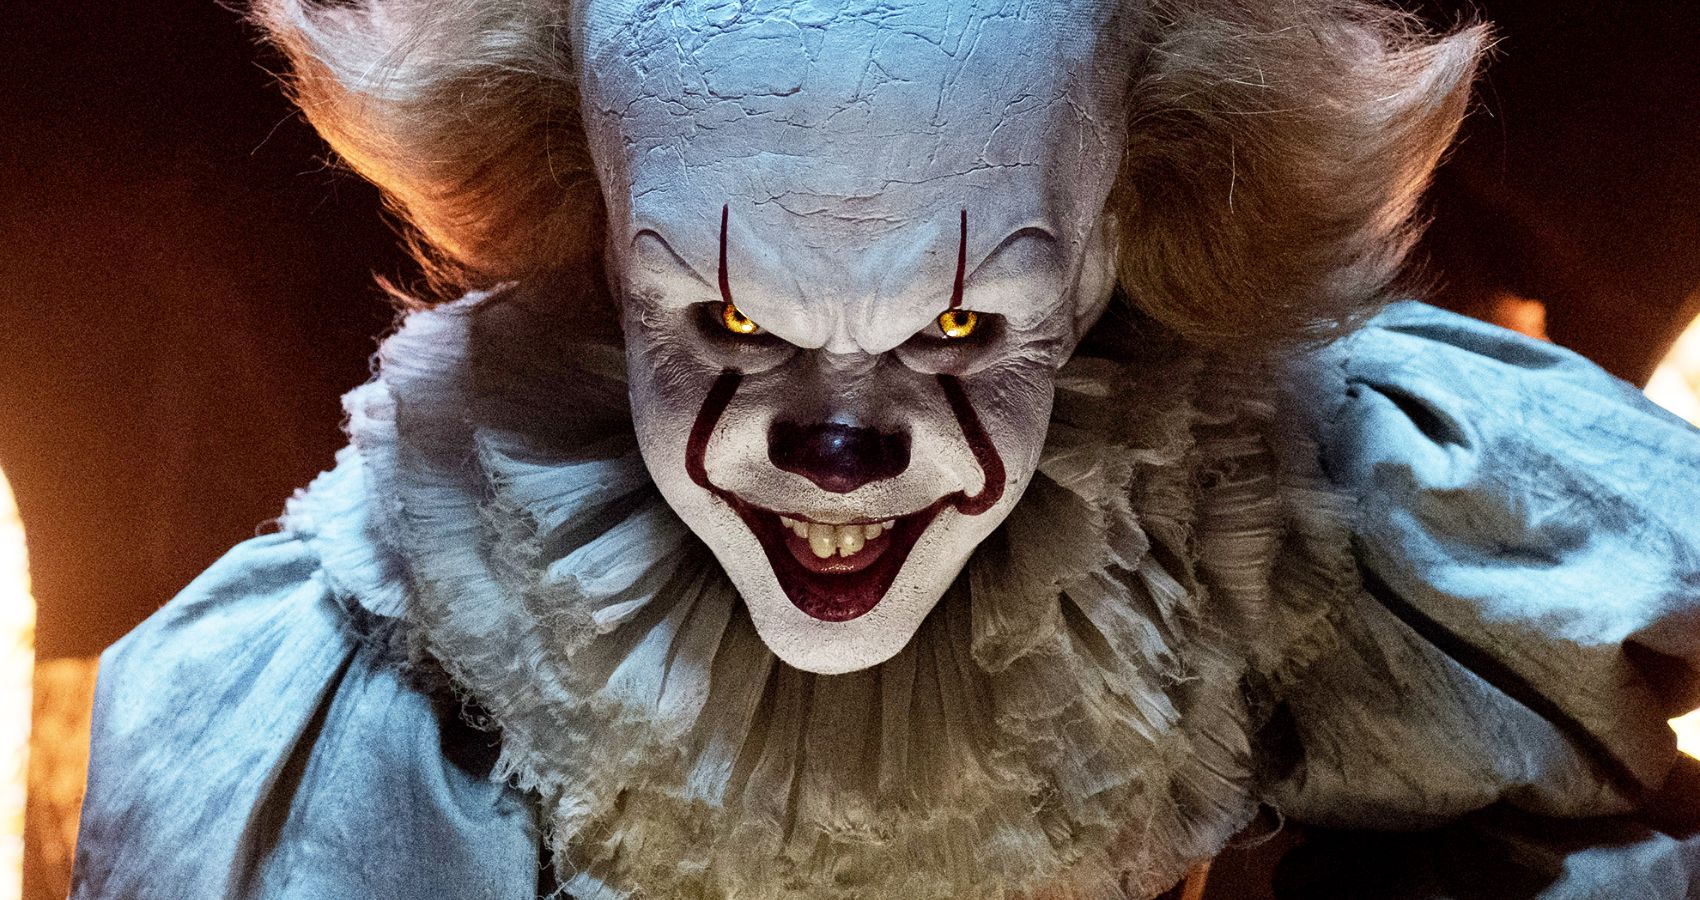 Stephen King's IT (2017), The Mist to Hit Netflix This Summer